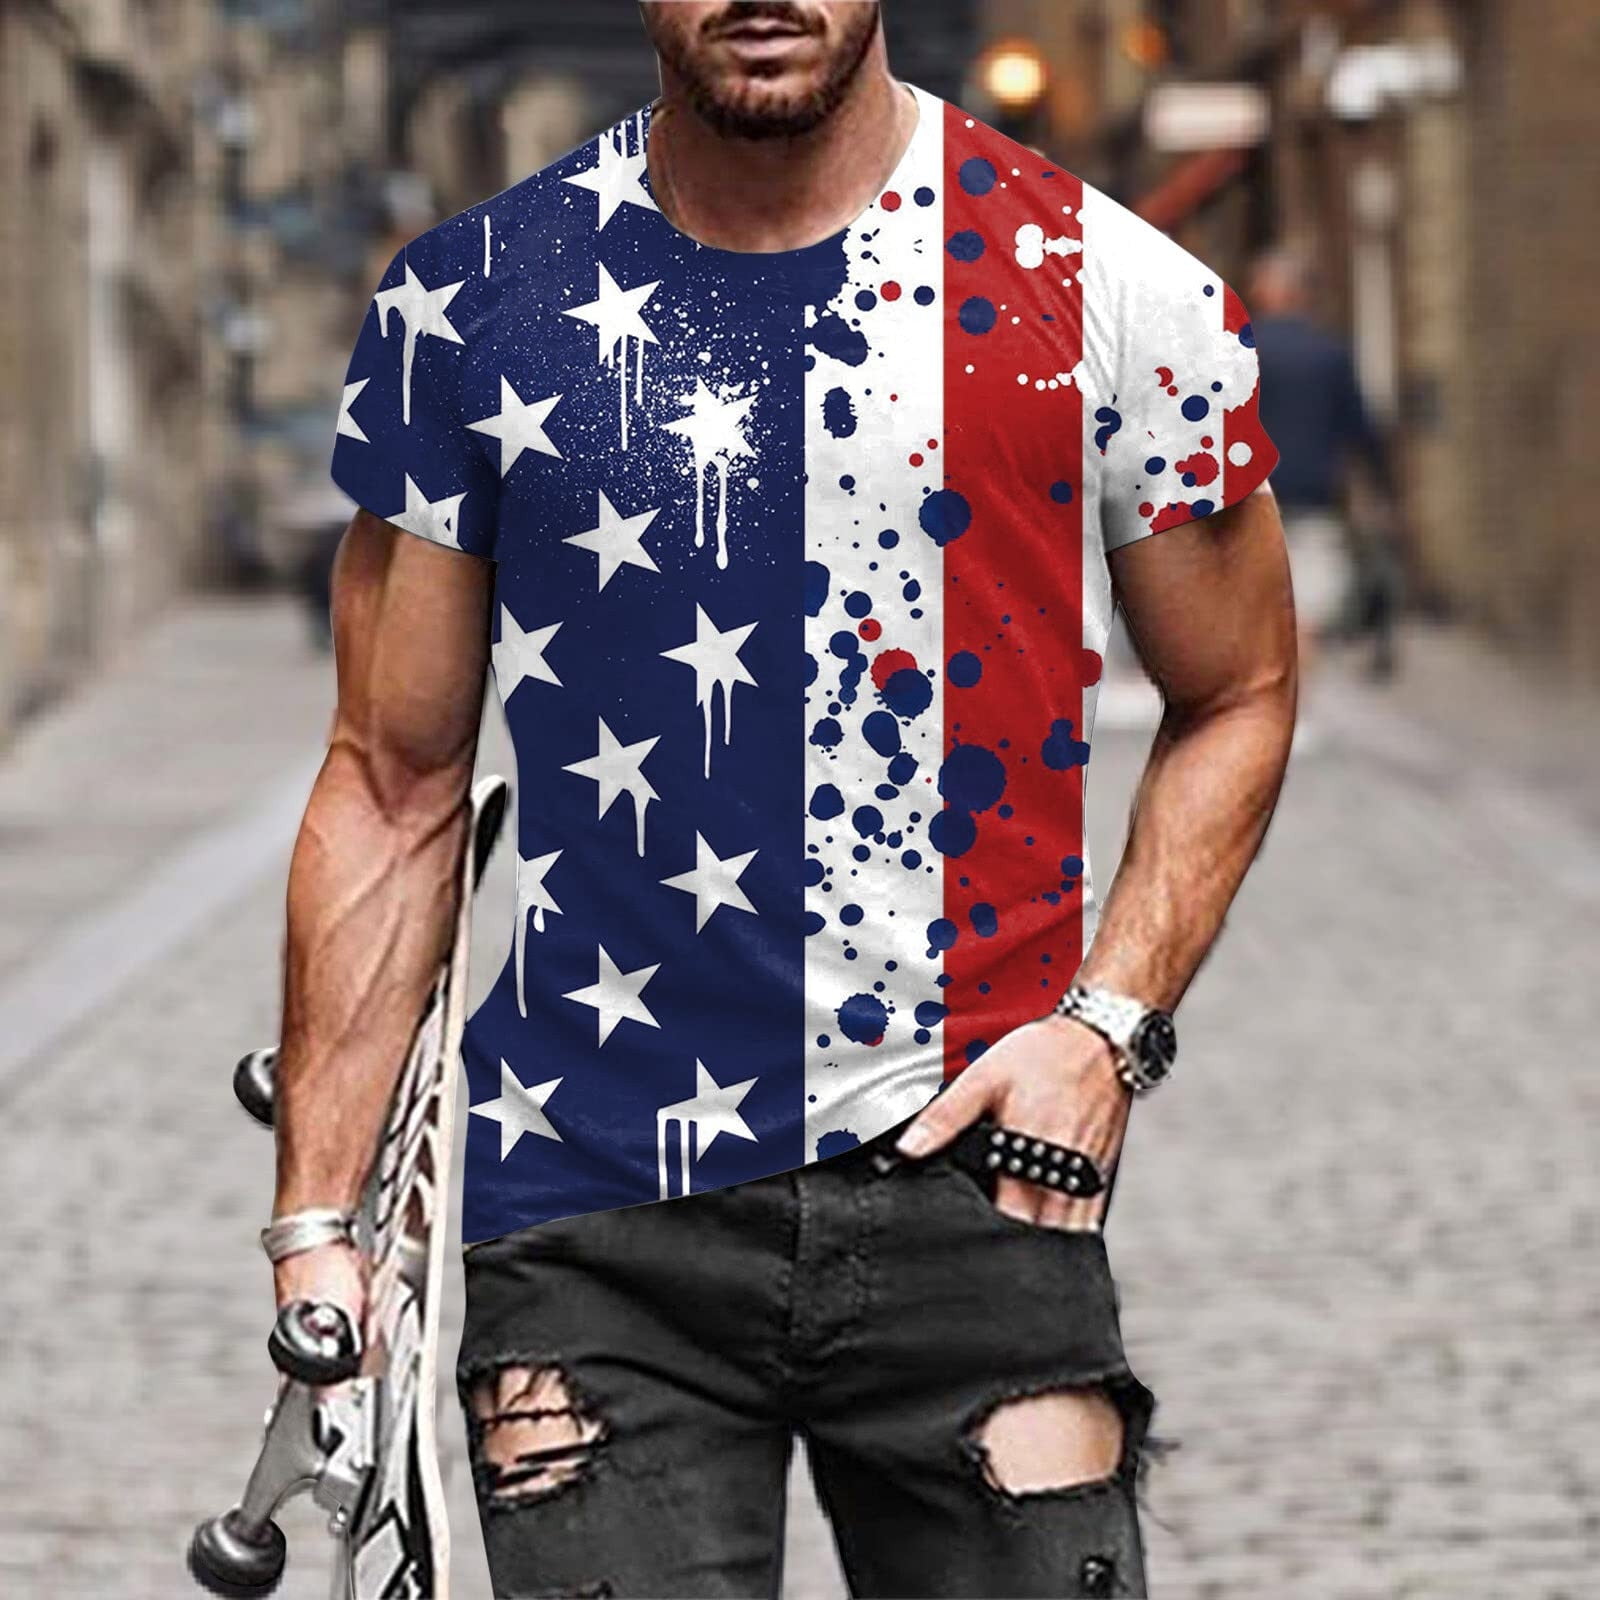 Patriotic Shirts for Men American Flag T-Shirt Funny Skull Graphic Summer Casual Short Sleeve Tops 4th of July Gift